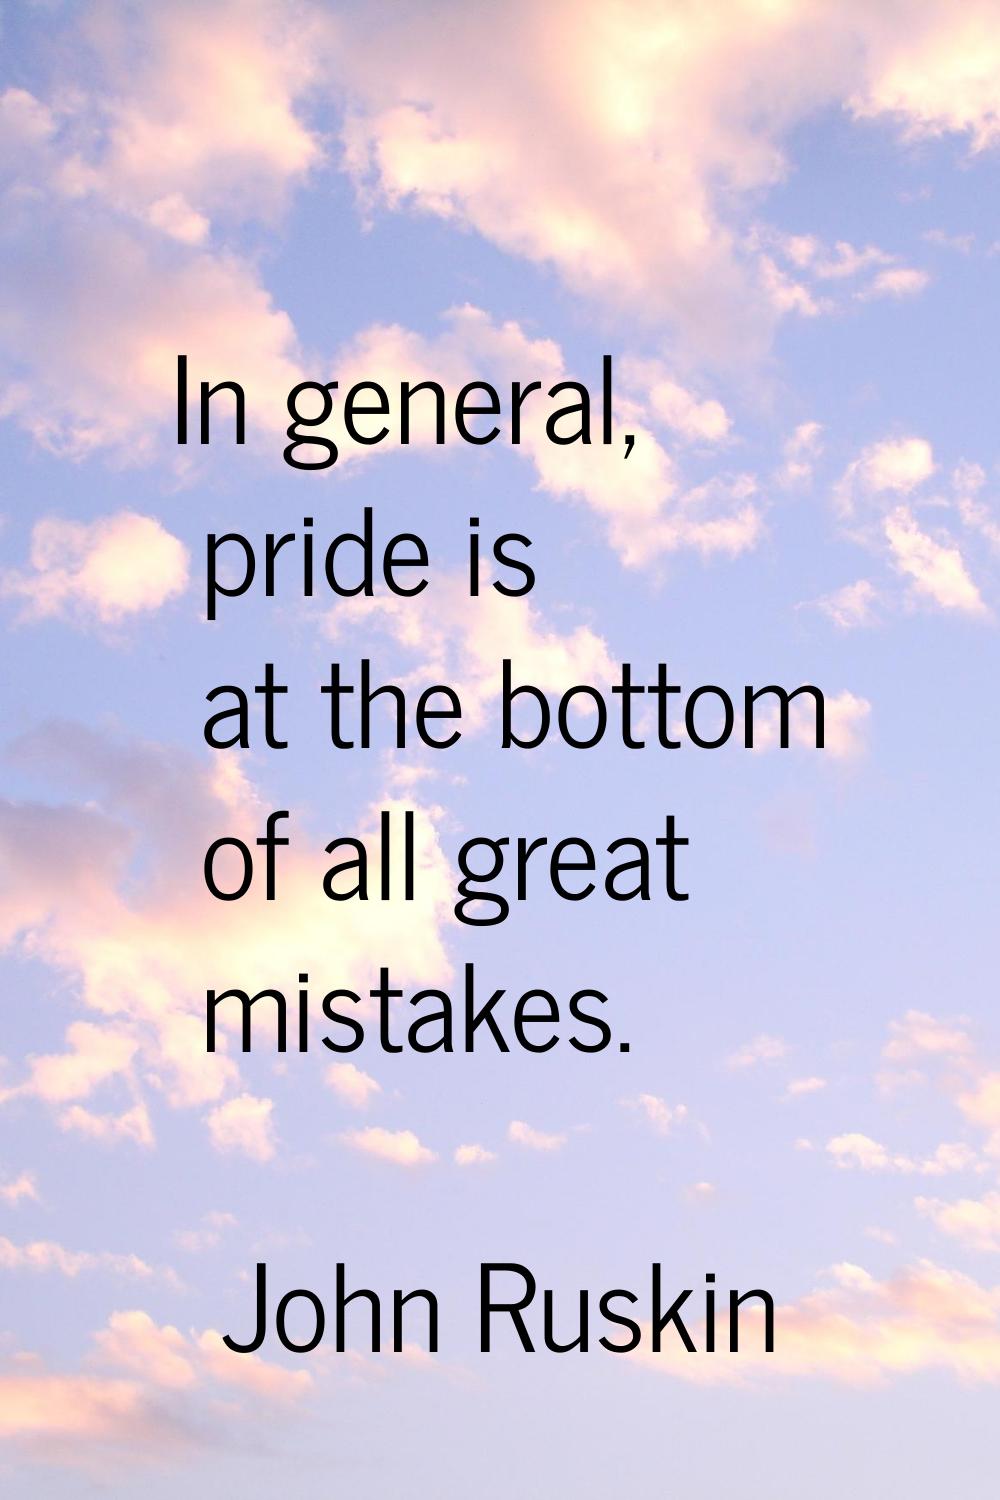 In general, pride is at the bottom of all great mistakes.